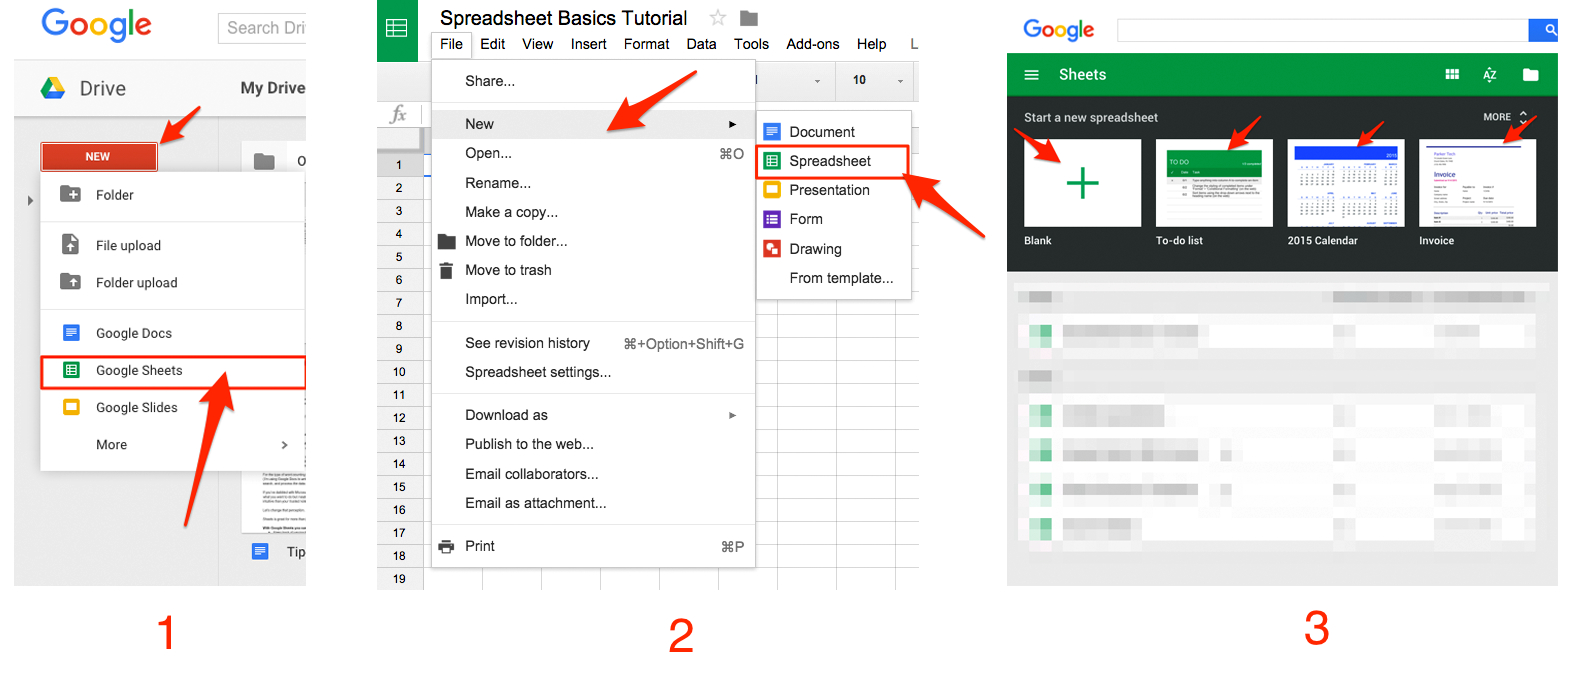 Google Spreadsheet Help Intended For Google Sheets 101: The Beginner's Guide To Online Spreadsheets  The